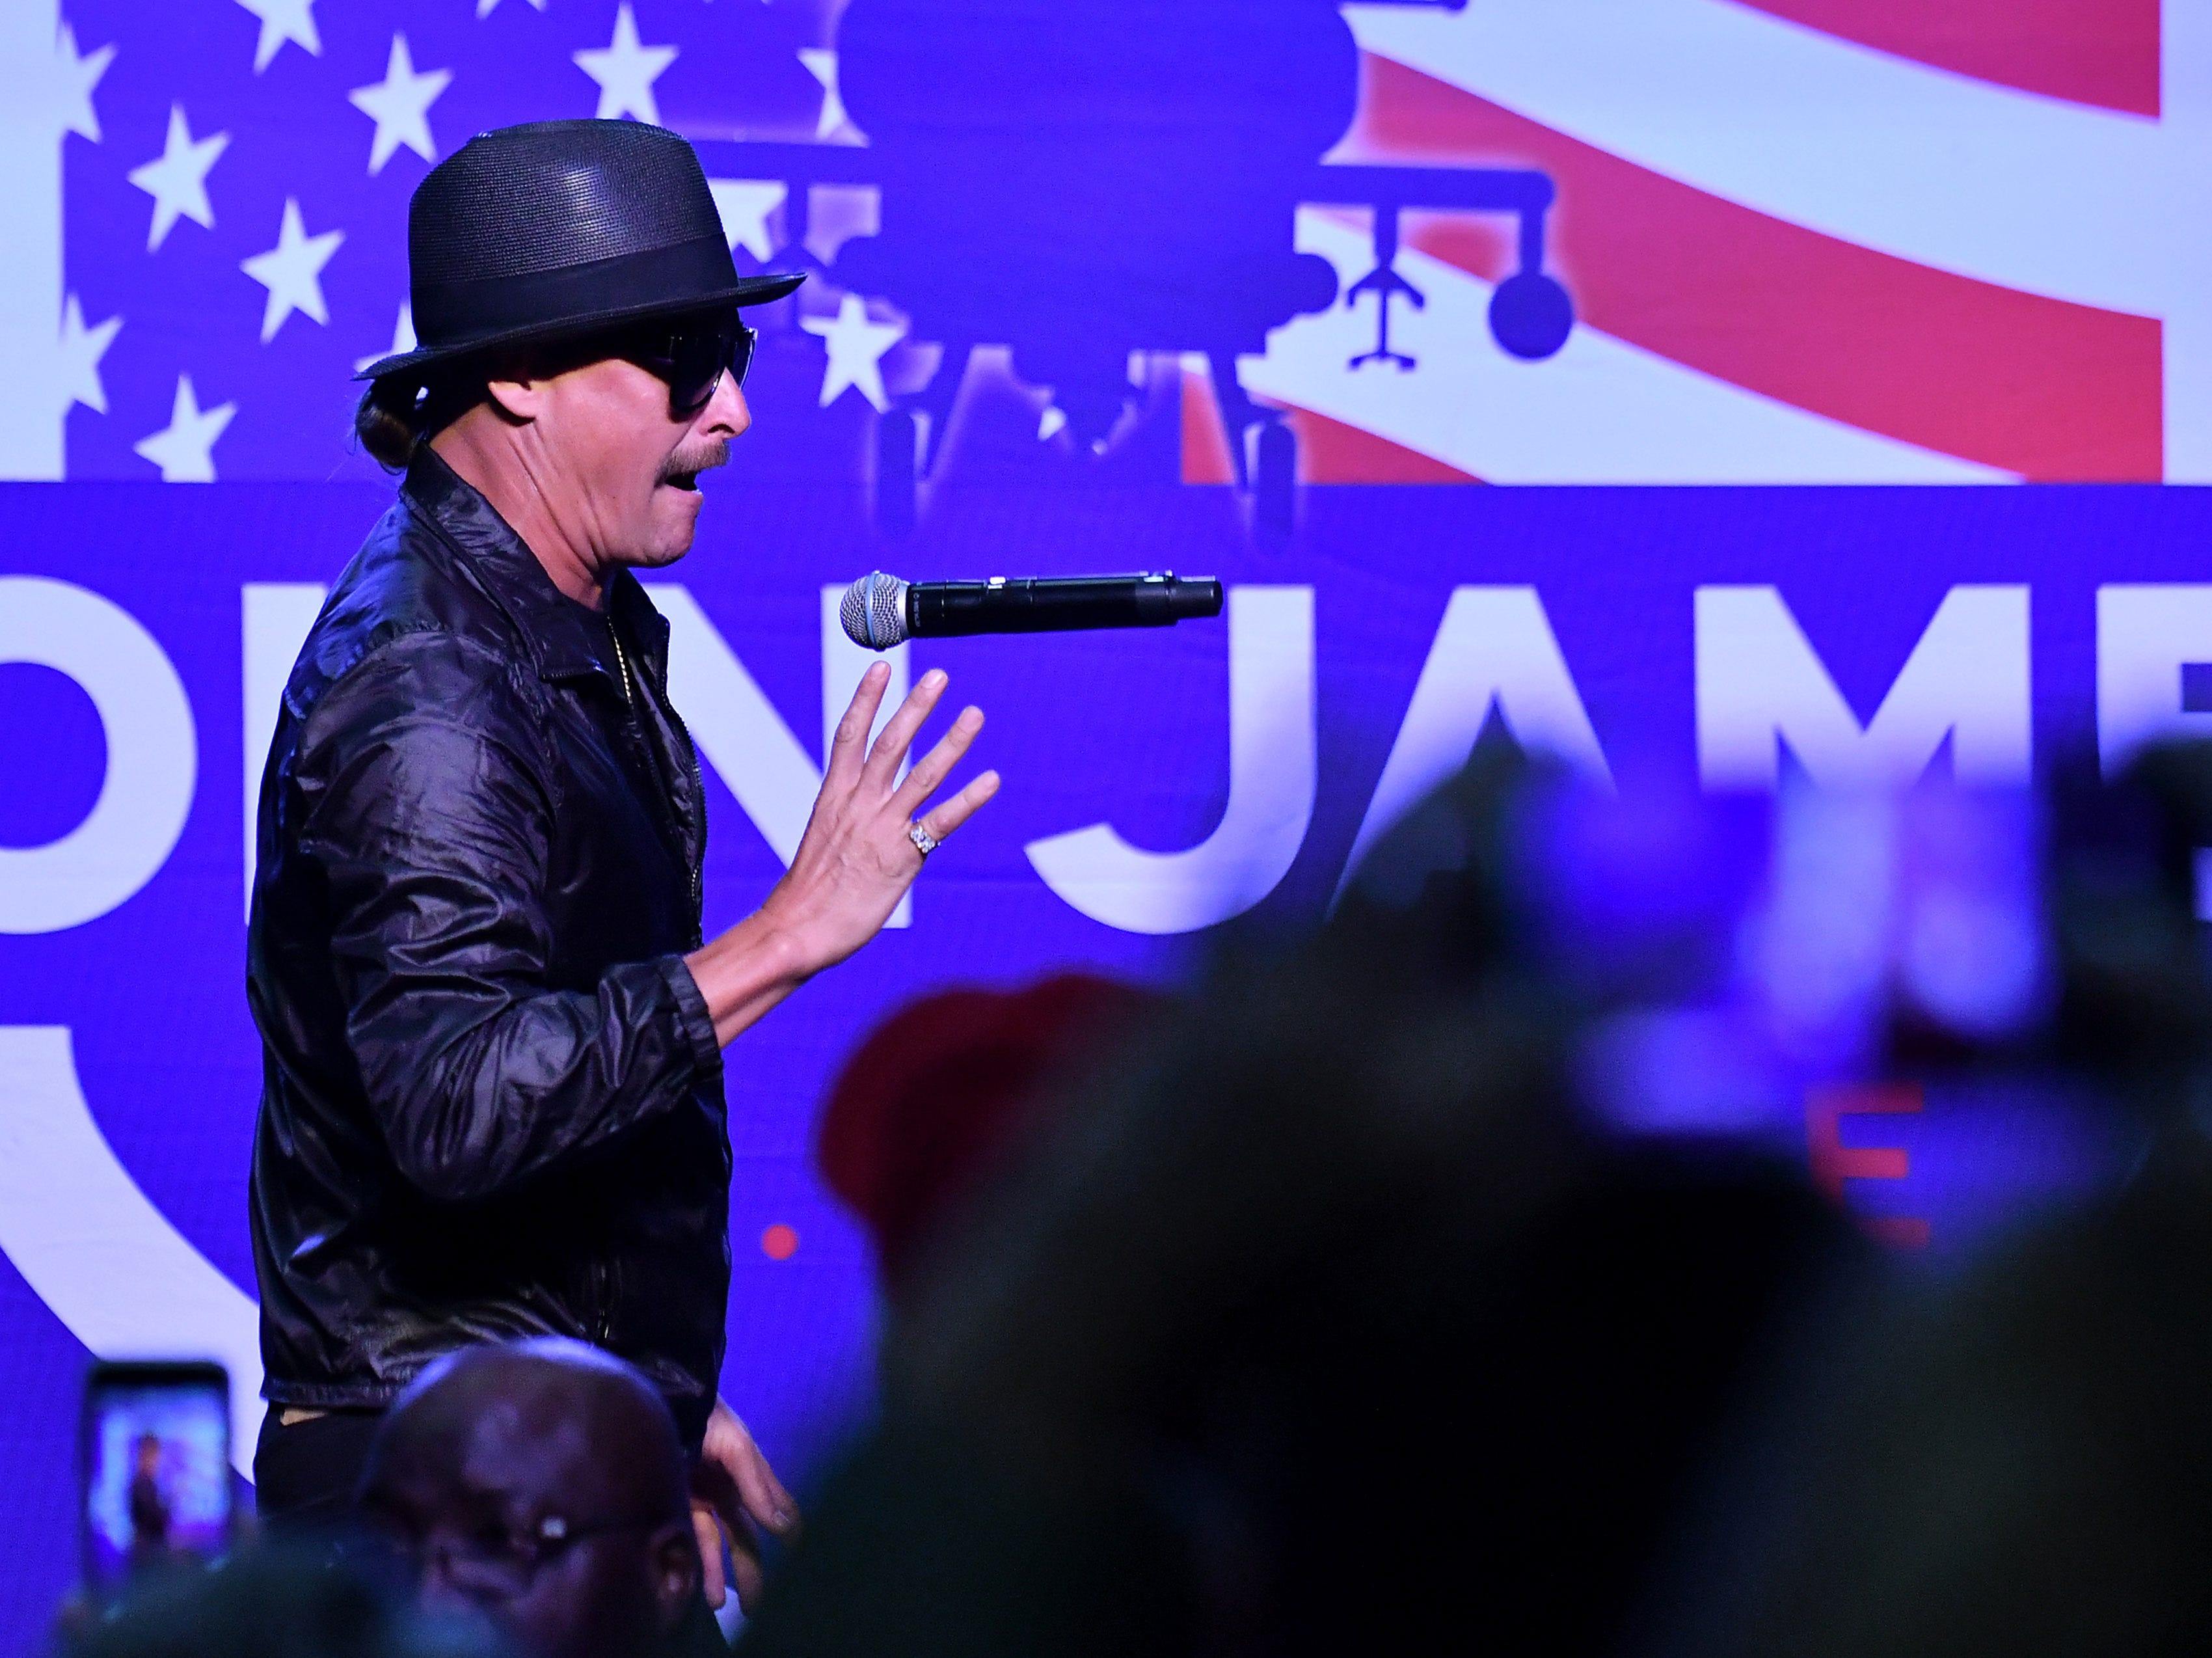 Kid Rock performs during the rally.